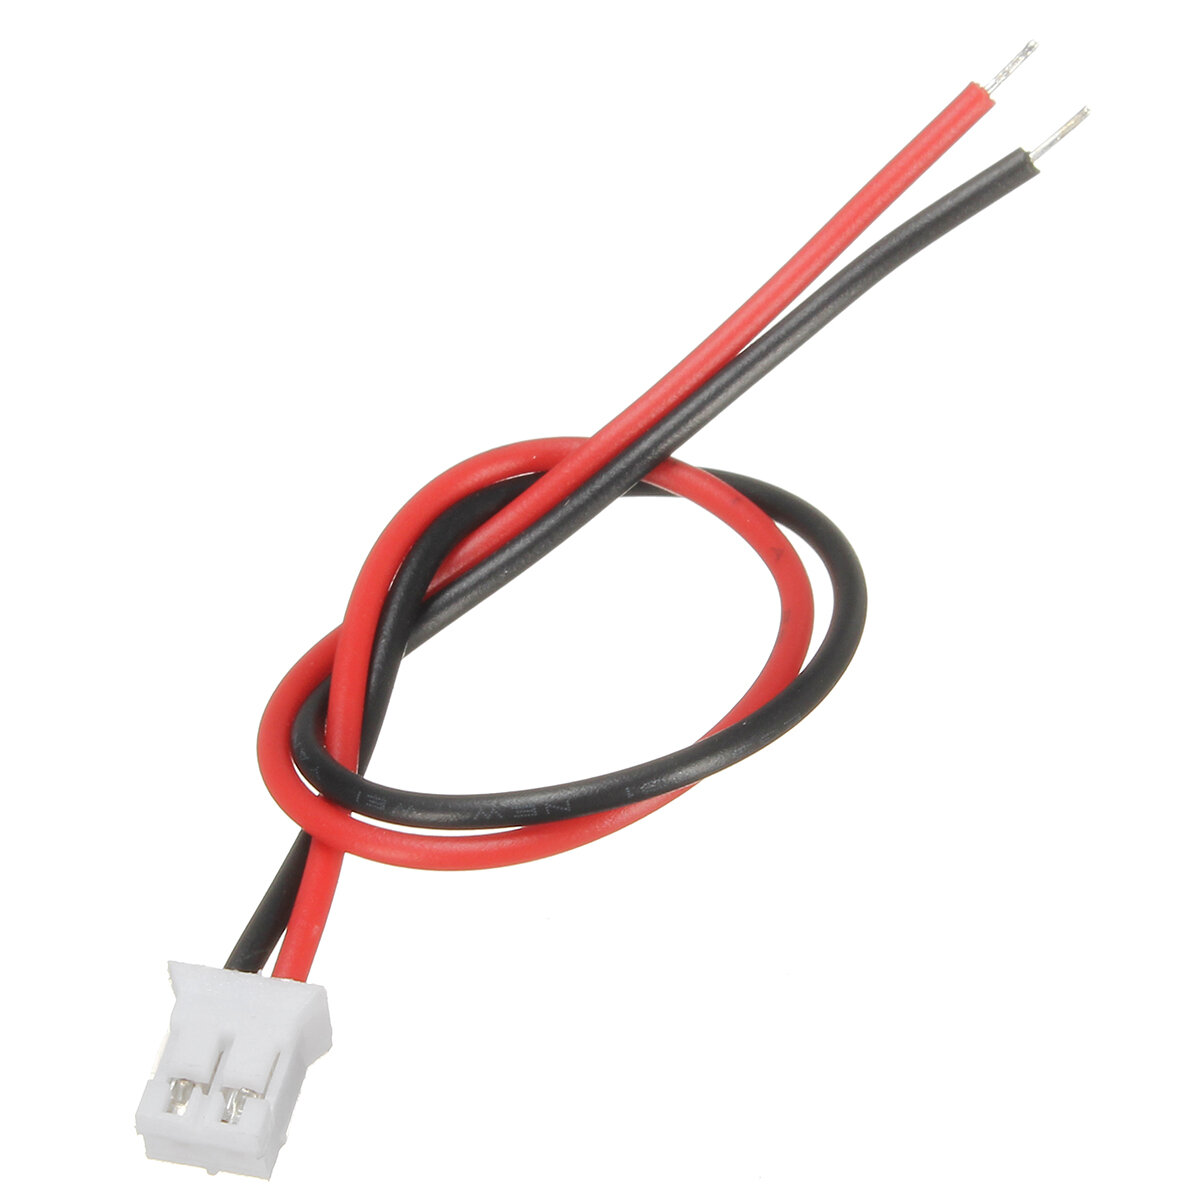 Micro JST 2.0mm PH 2-Pin Connector Plug With Wires Cables 120mm Neu